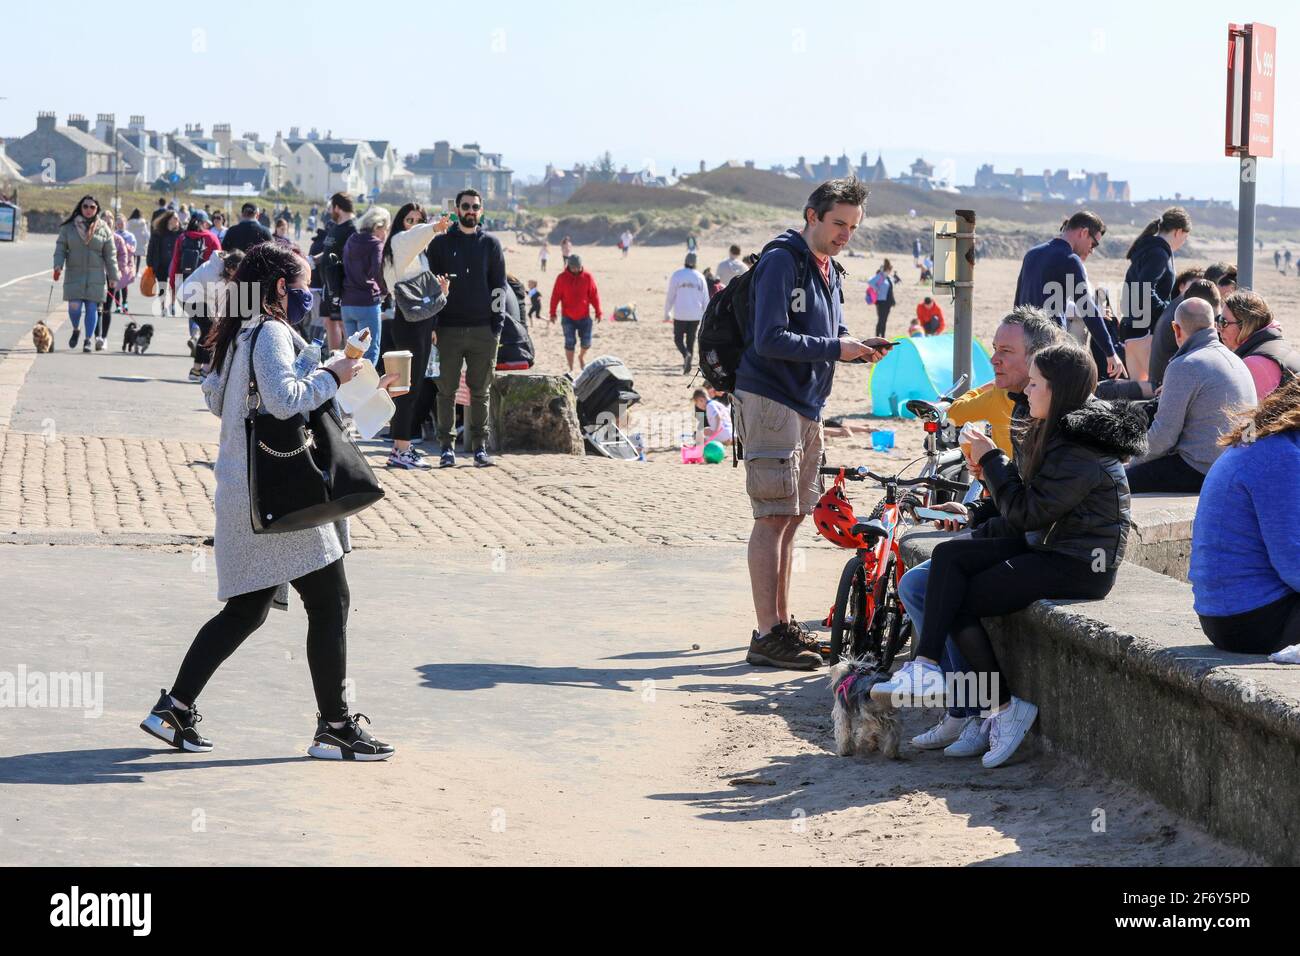 Troon, UK. 03rd Apr, 2021. On the first day of the easing of lockdown restrictions in Scotland, allowing people to 'travel locally' many took advantage of the sunny weather on Easter Saturday and enjoyed a day at the beach in Troon. Credit: Findlay/Alamy Live News Stock Photo